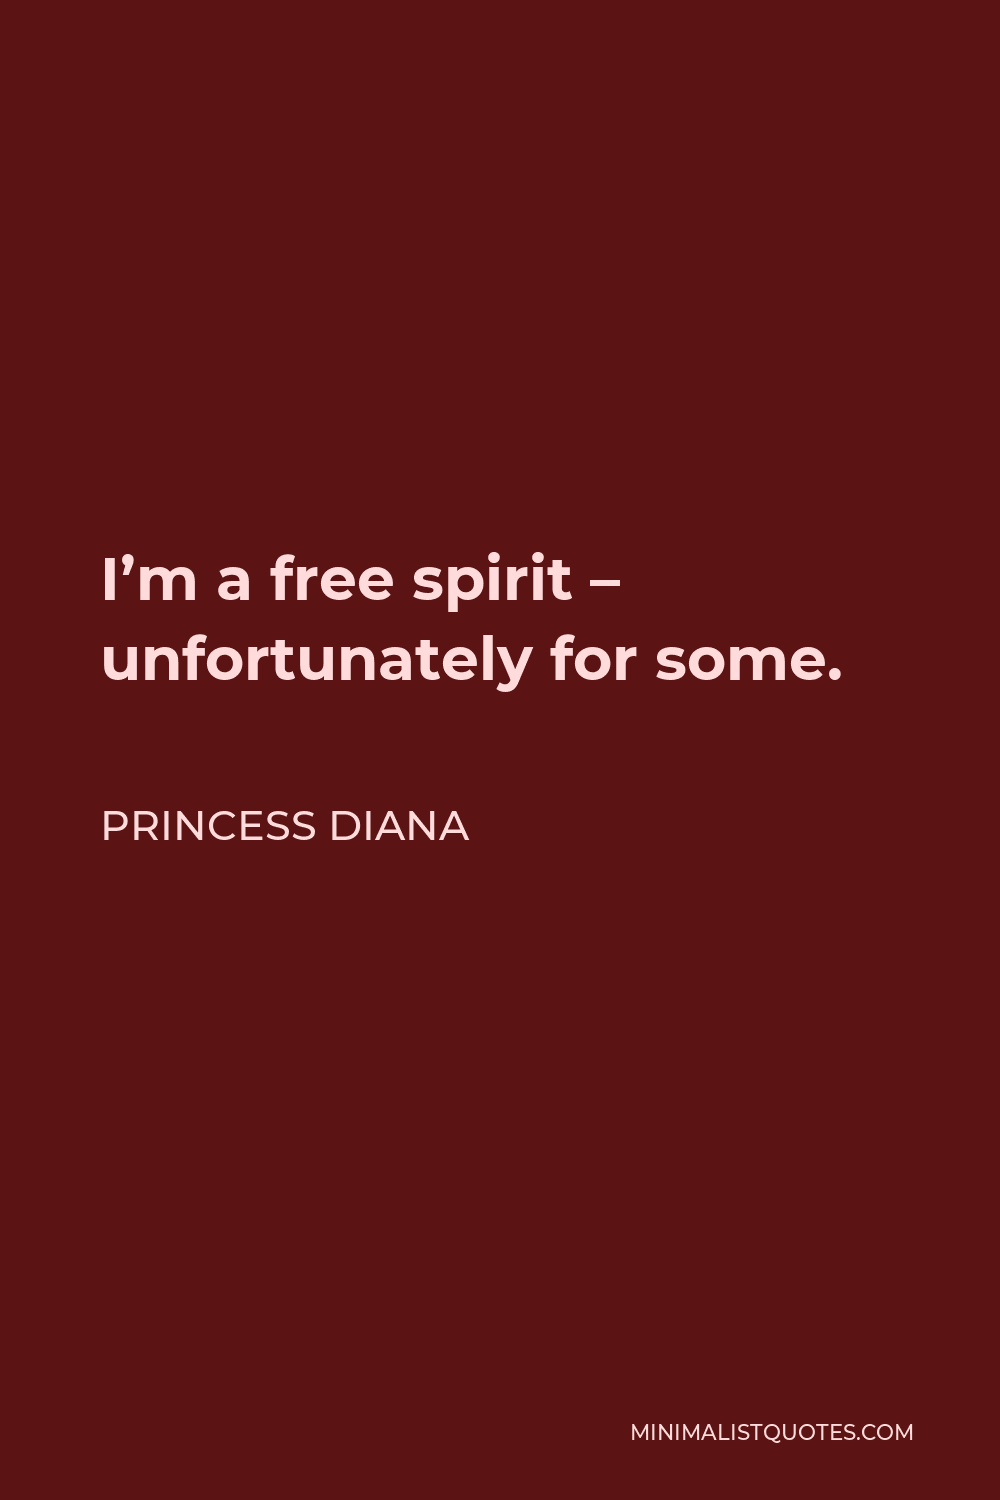 Princess Diana Quote - I’m a free spirit – unfortunately for some.